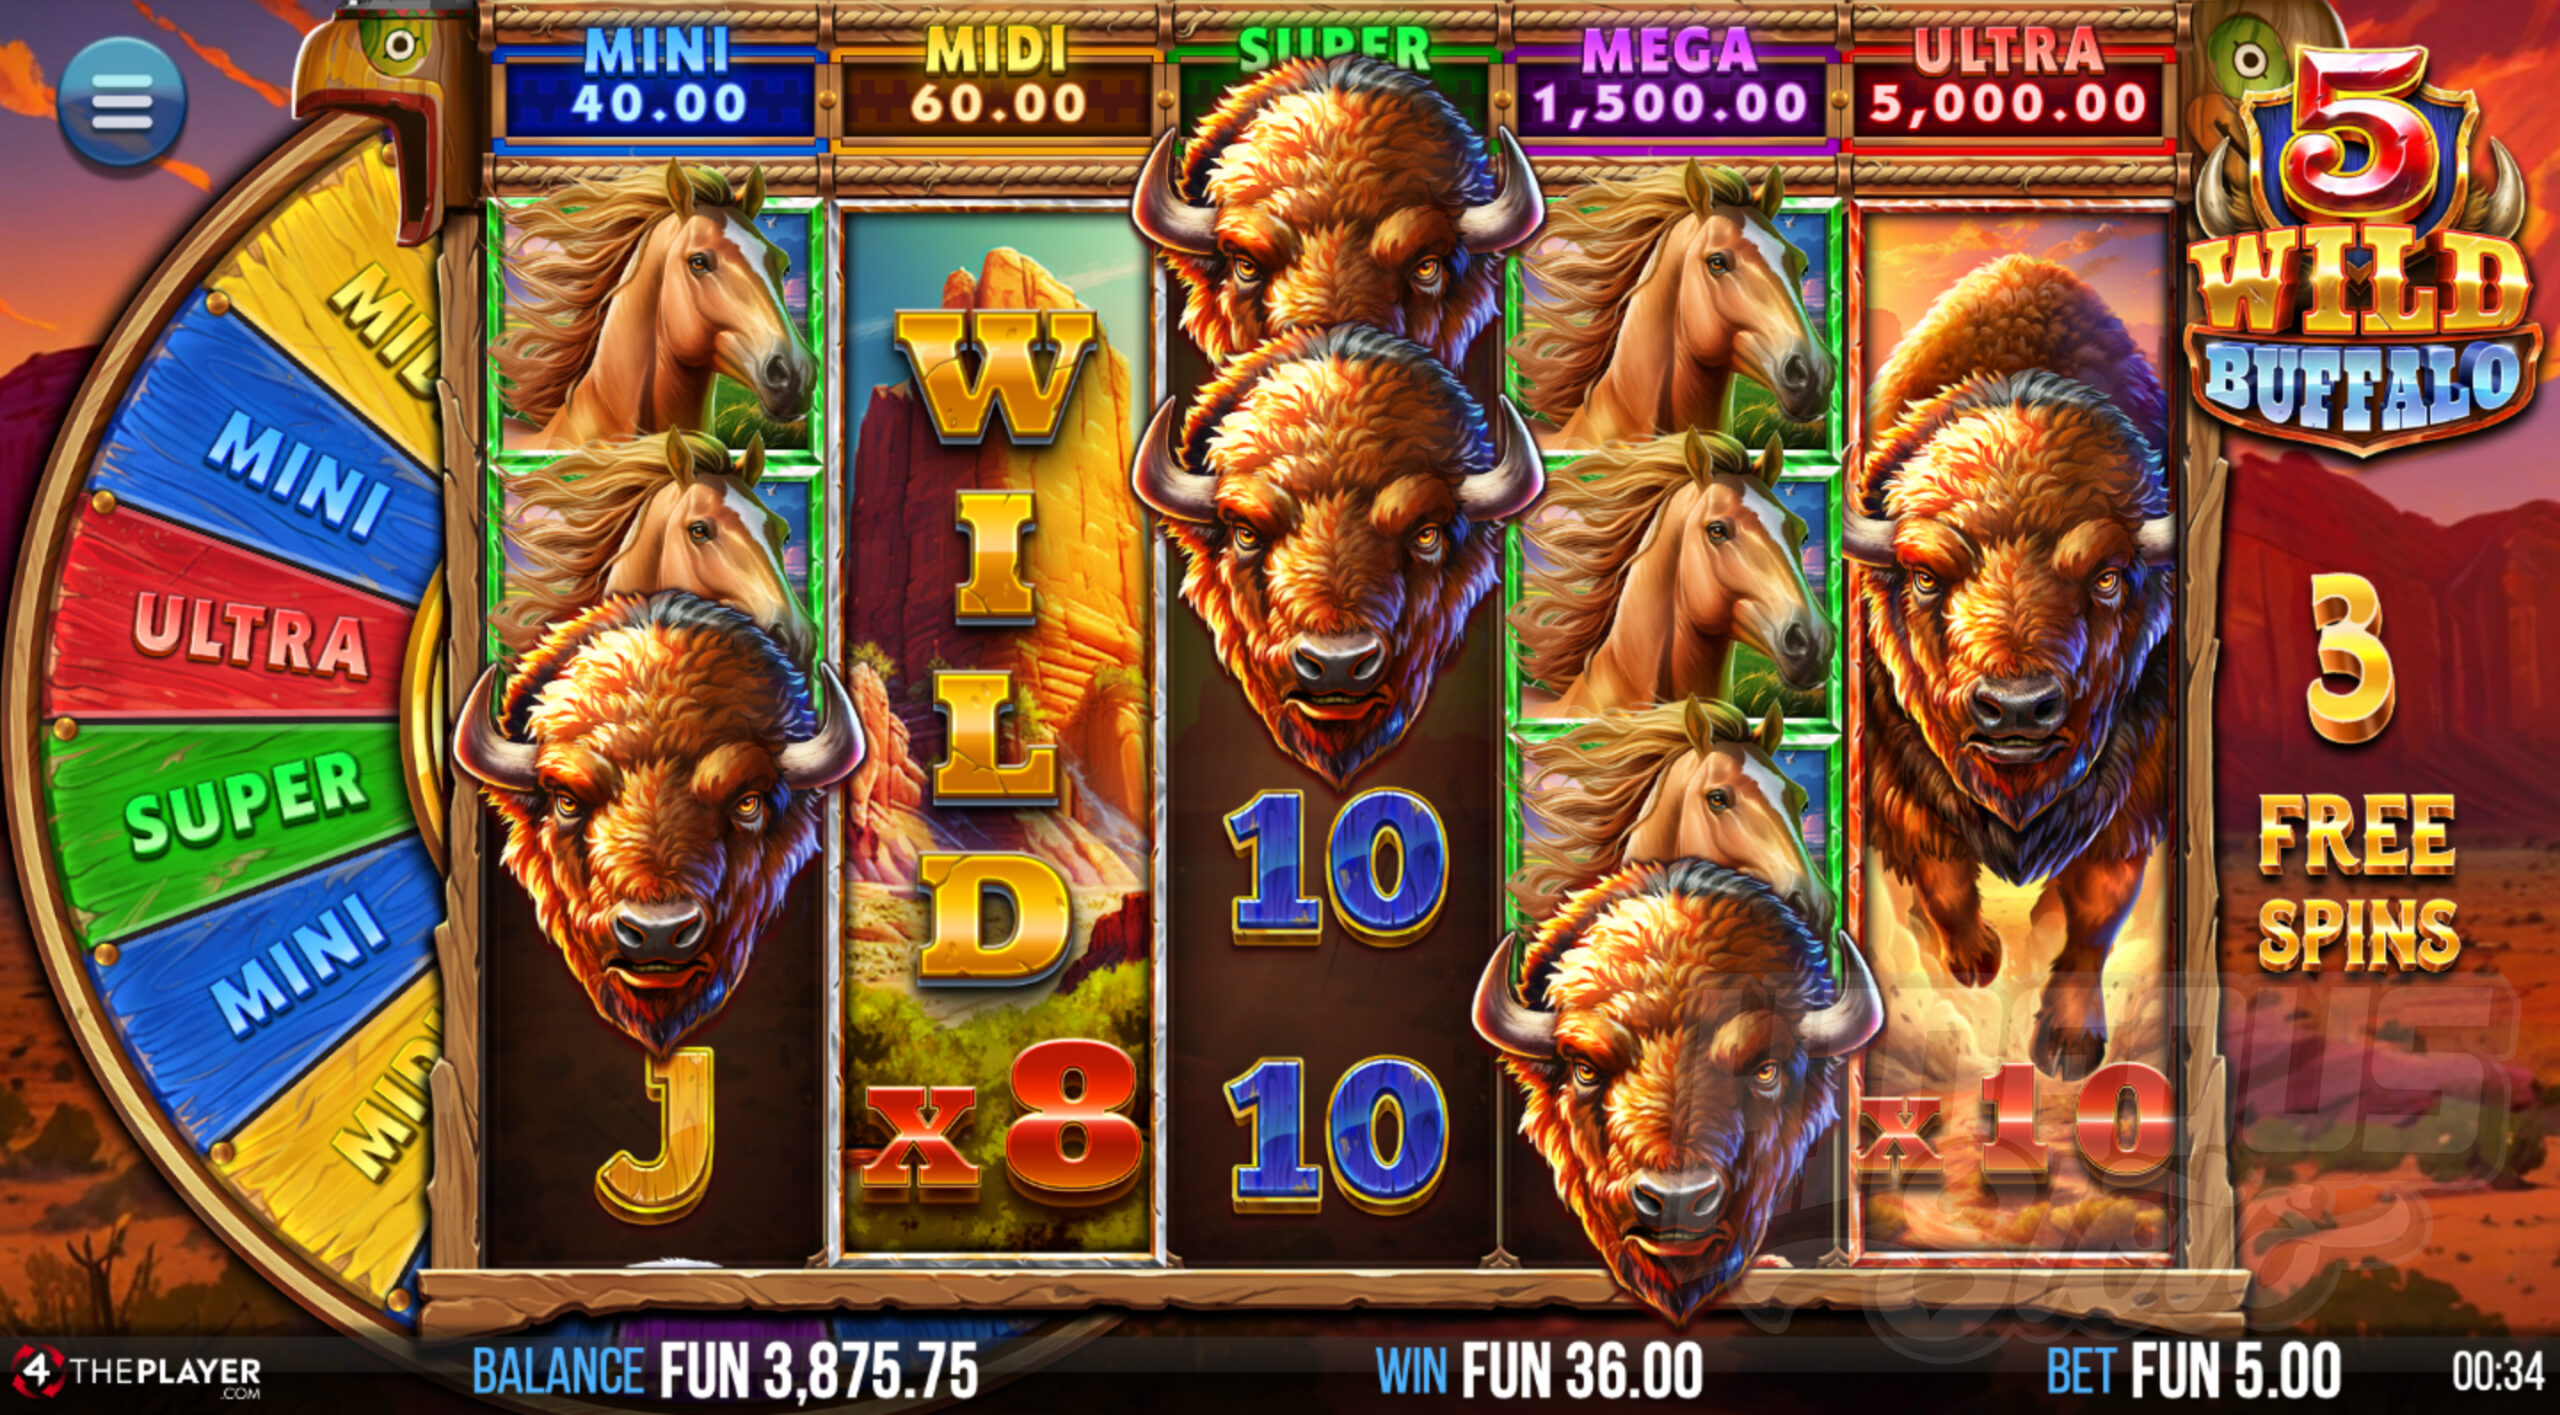 During Free Spins Any Wild Symbols That Land Will Fill The Reel and Gain a Multiplier up to x12